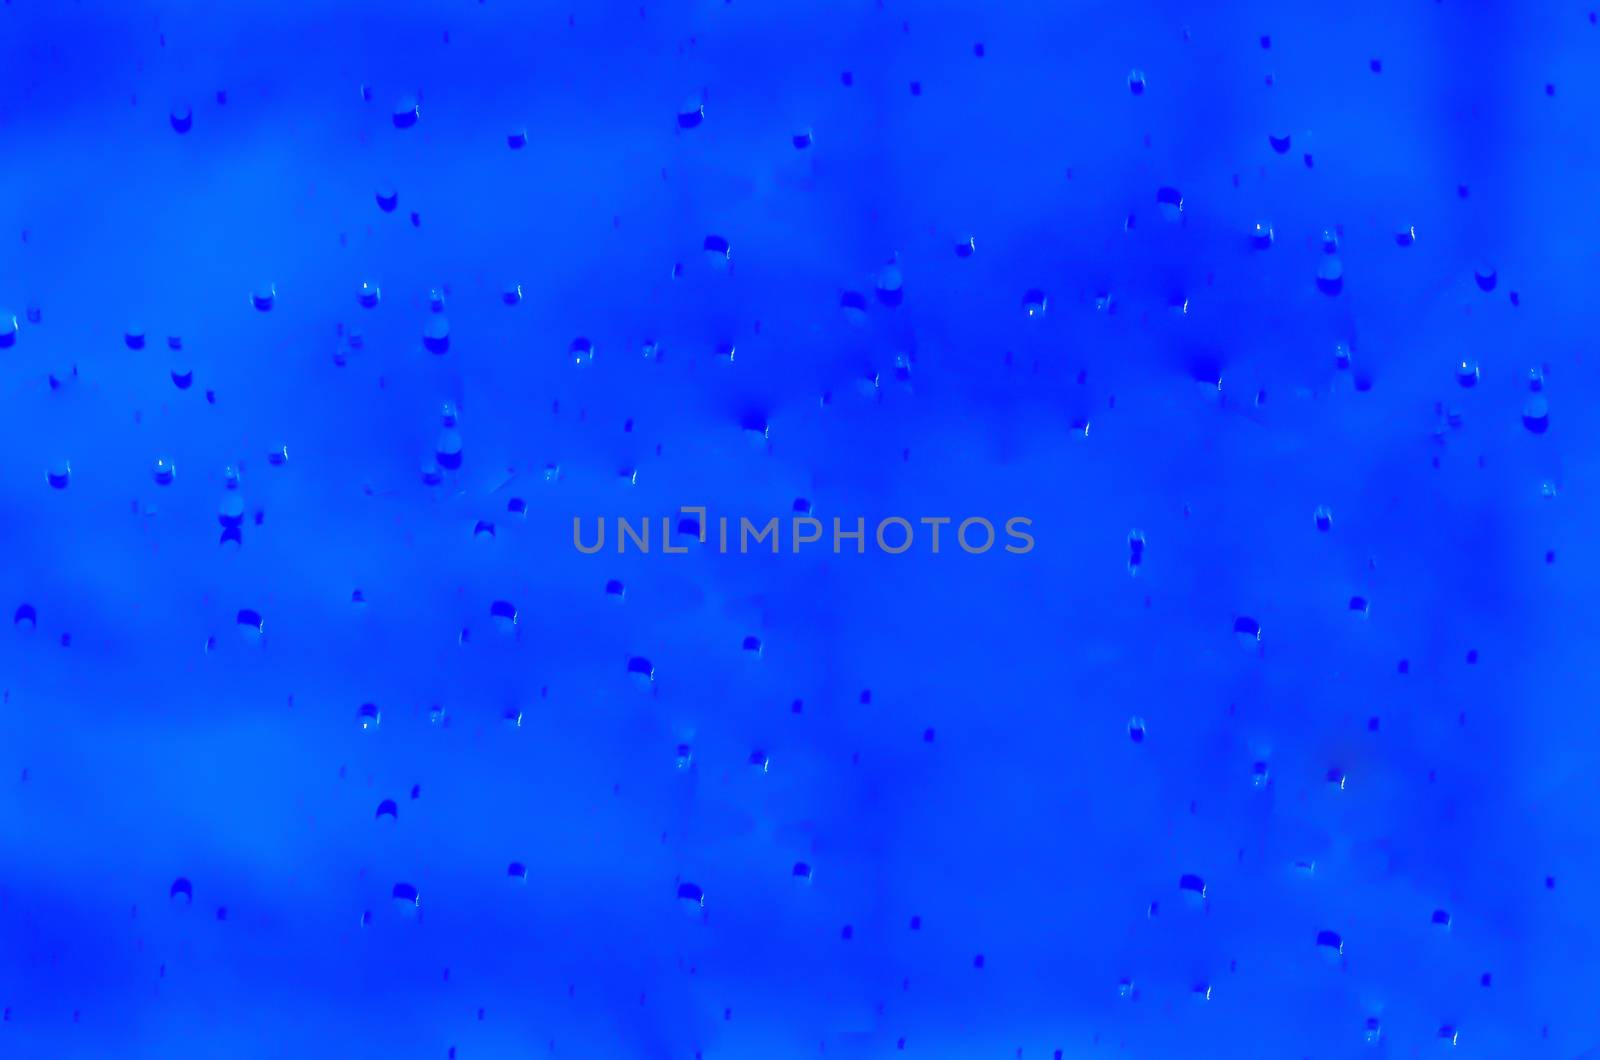 Closeup of a blue liquid, water, background image.